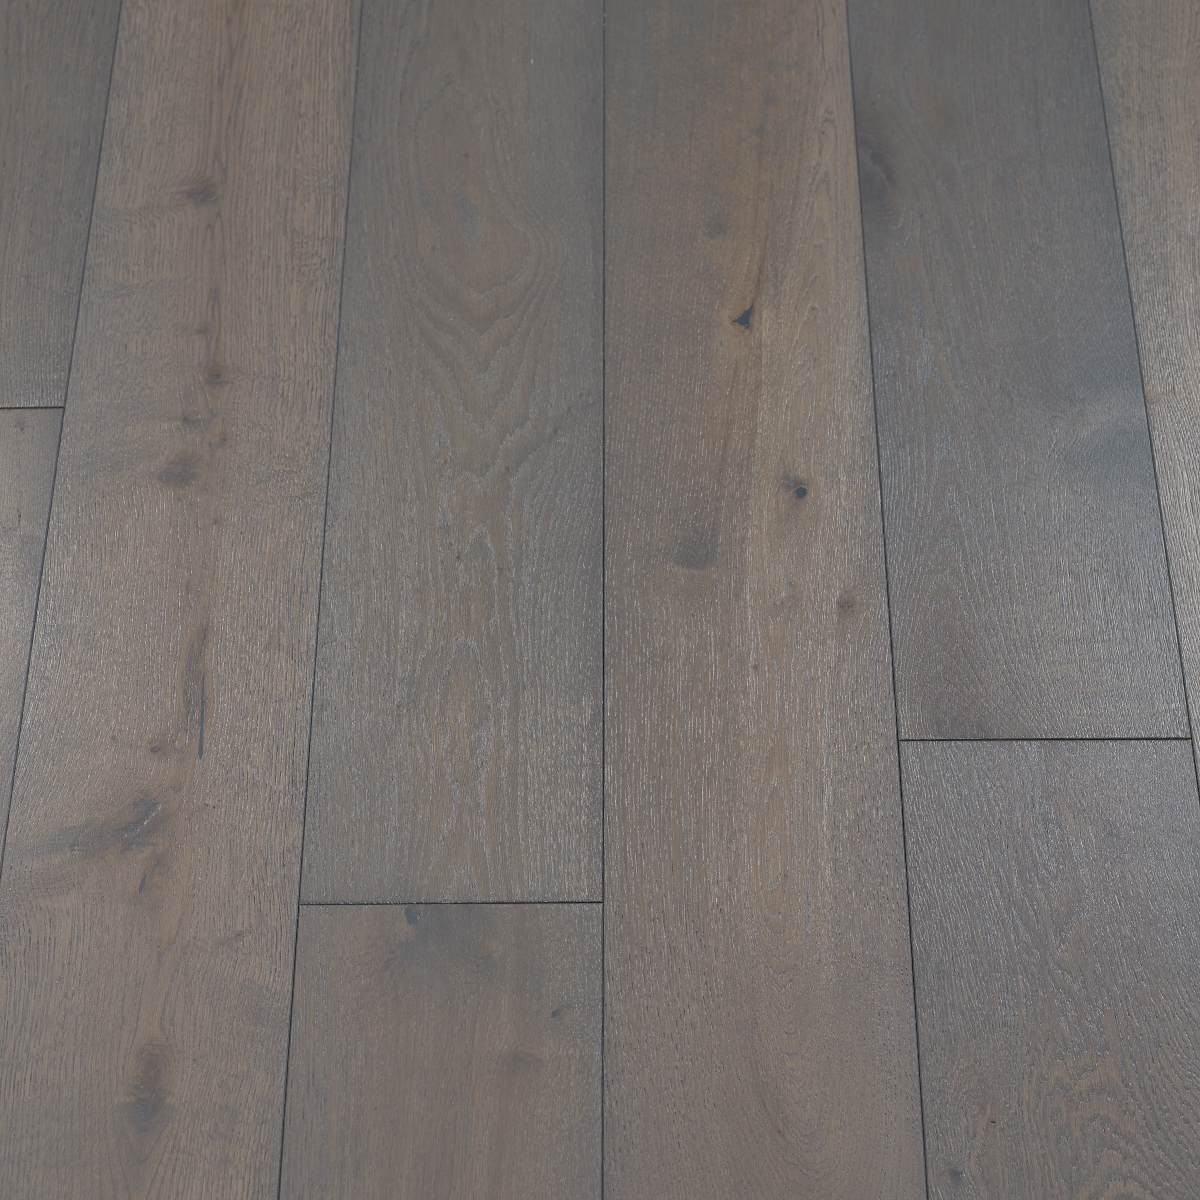 Classic Boulder Wood Flooring - image showcasing a boulder-gray wood flooring with a natural and neutral colour, adding a sense of calmness to the space.